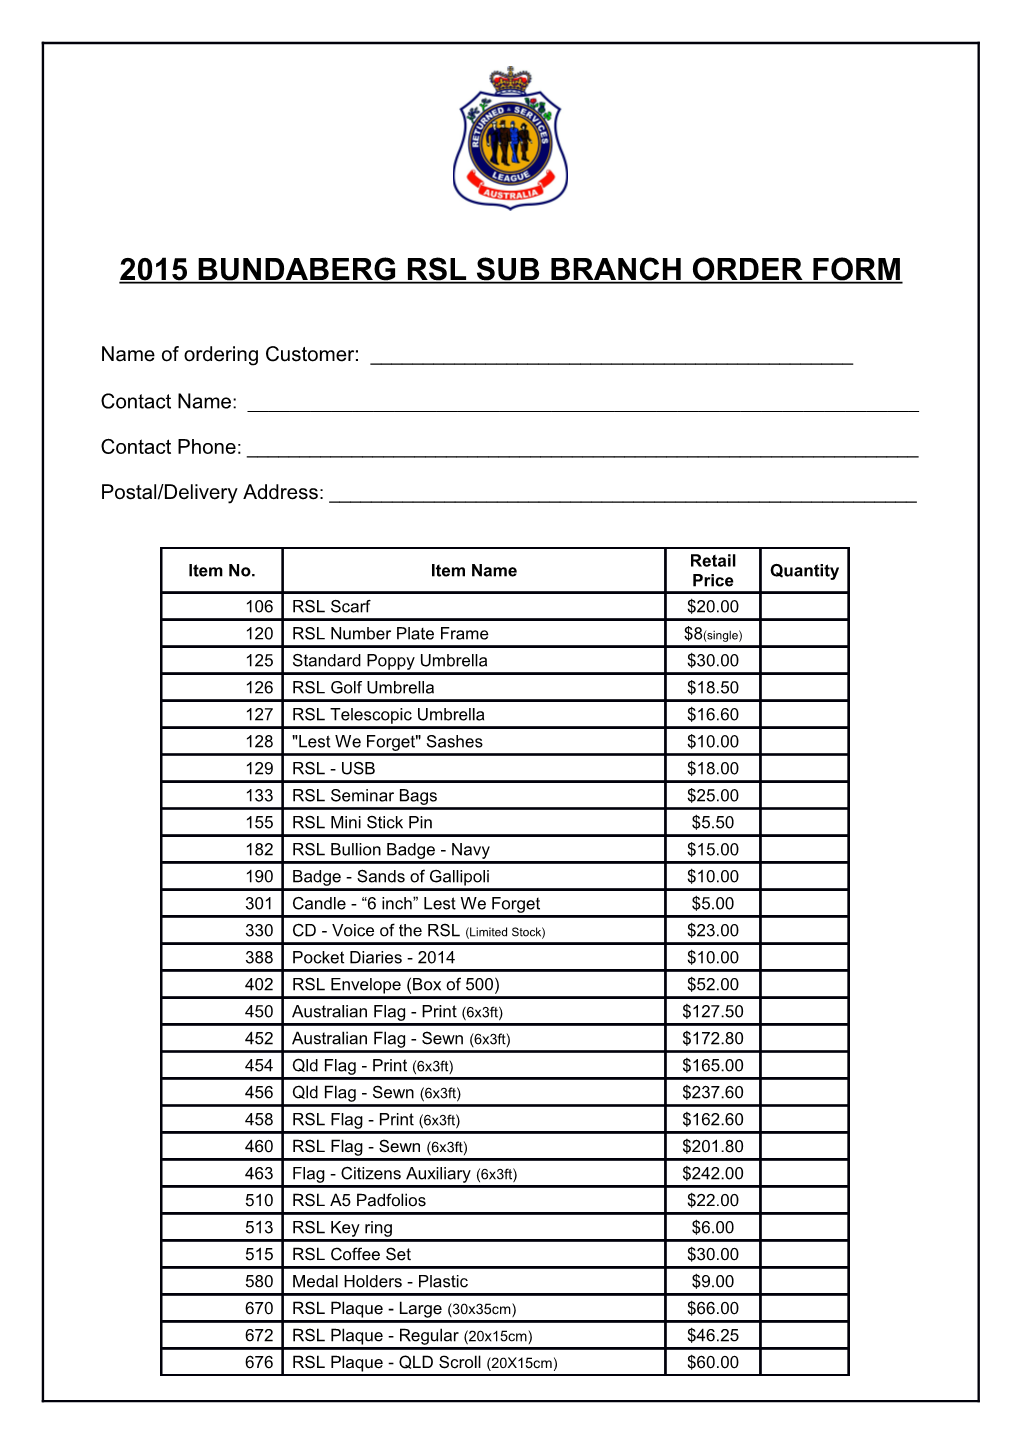 2002 Remembrance Day - Order Form